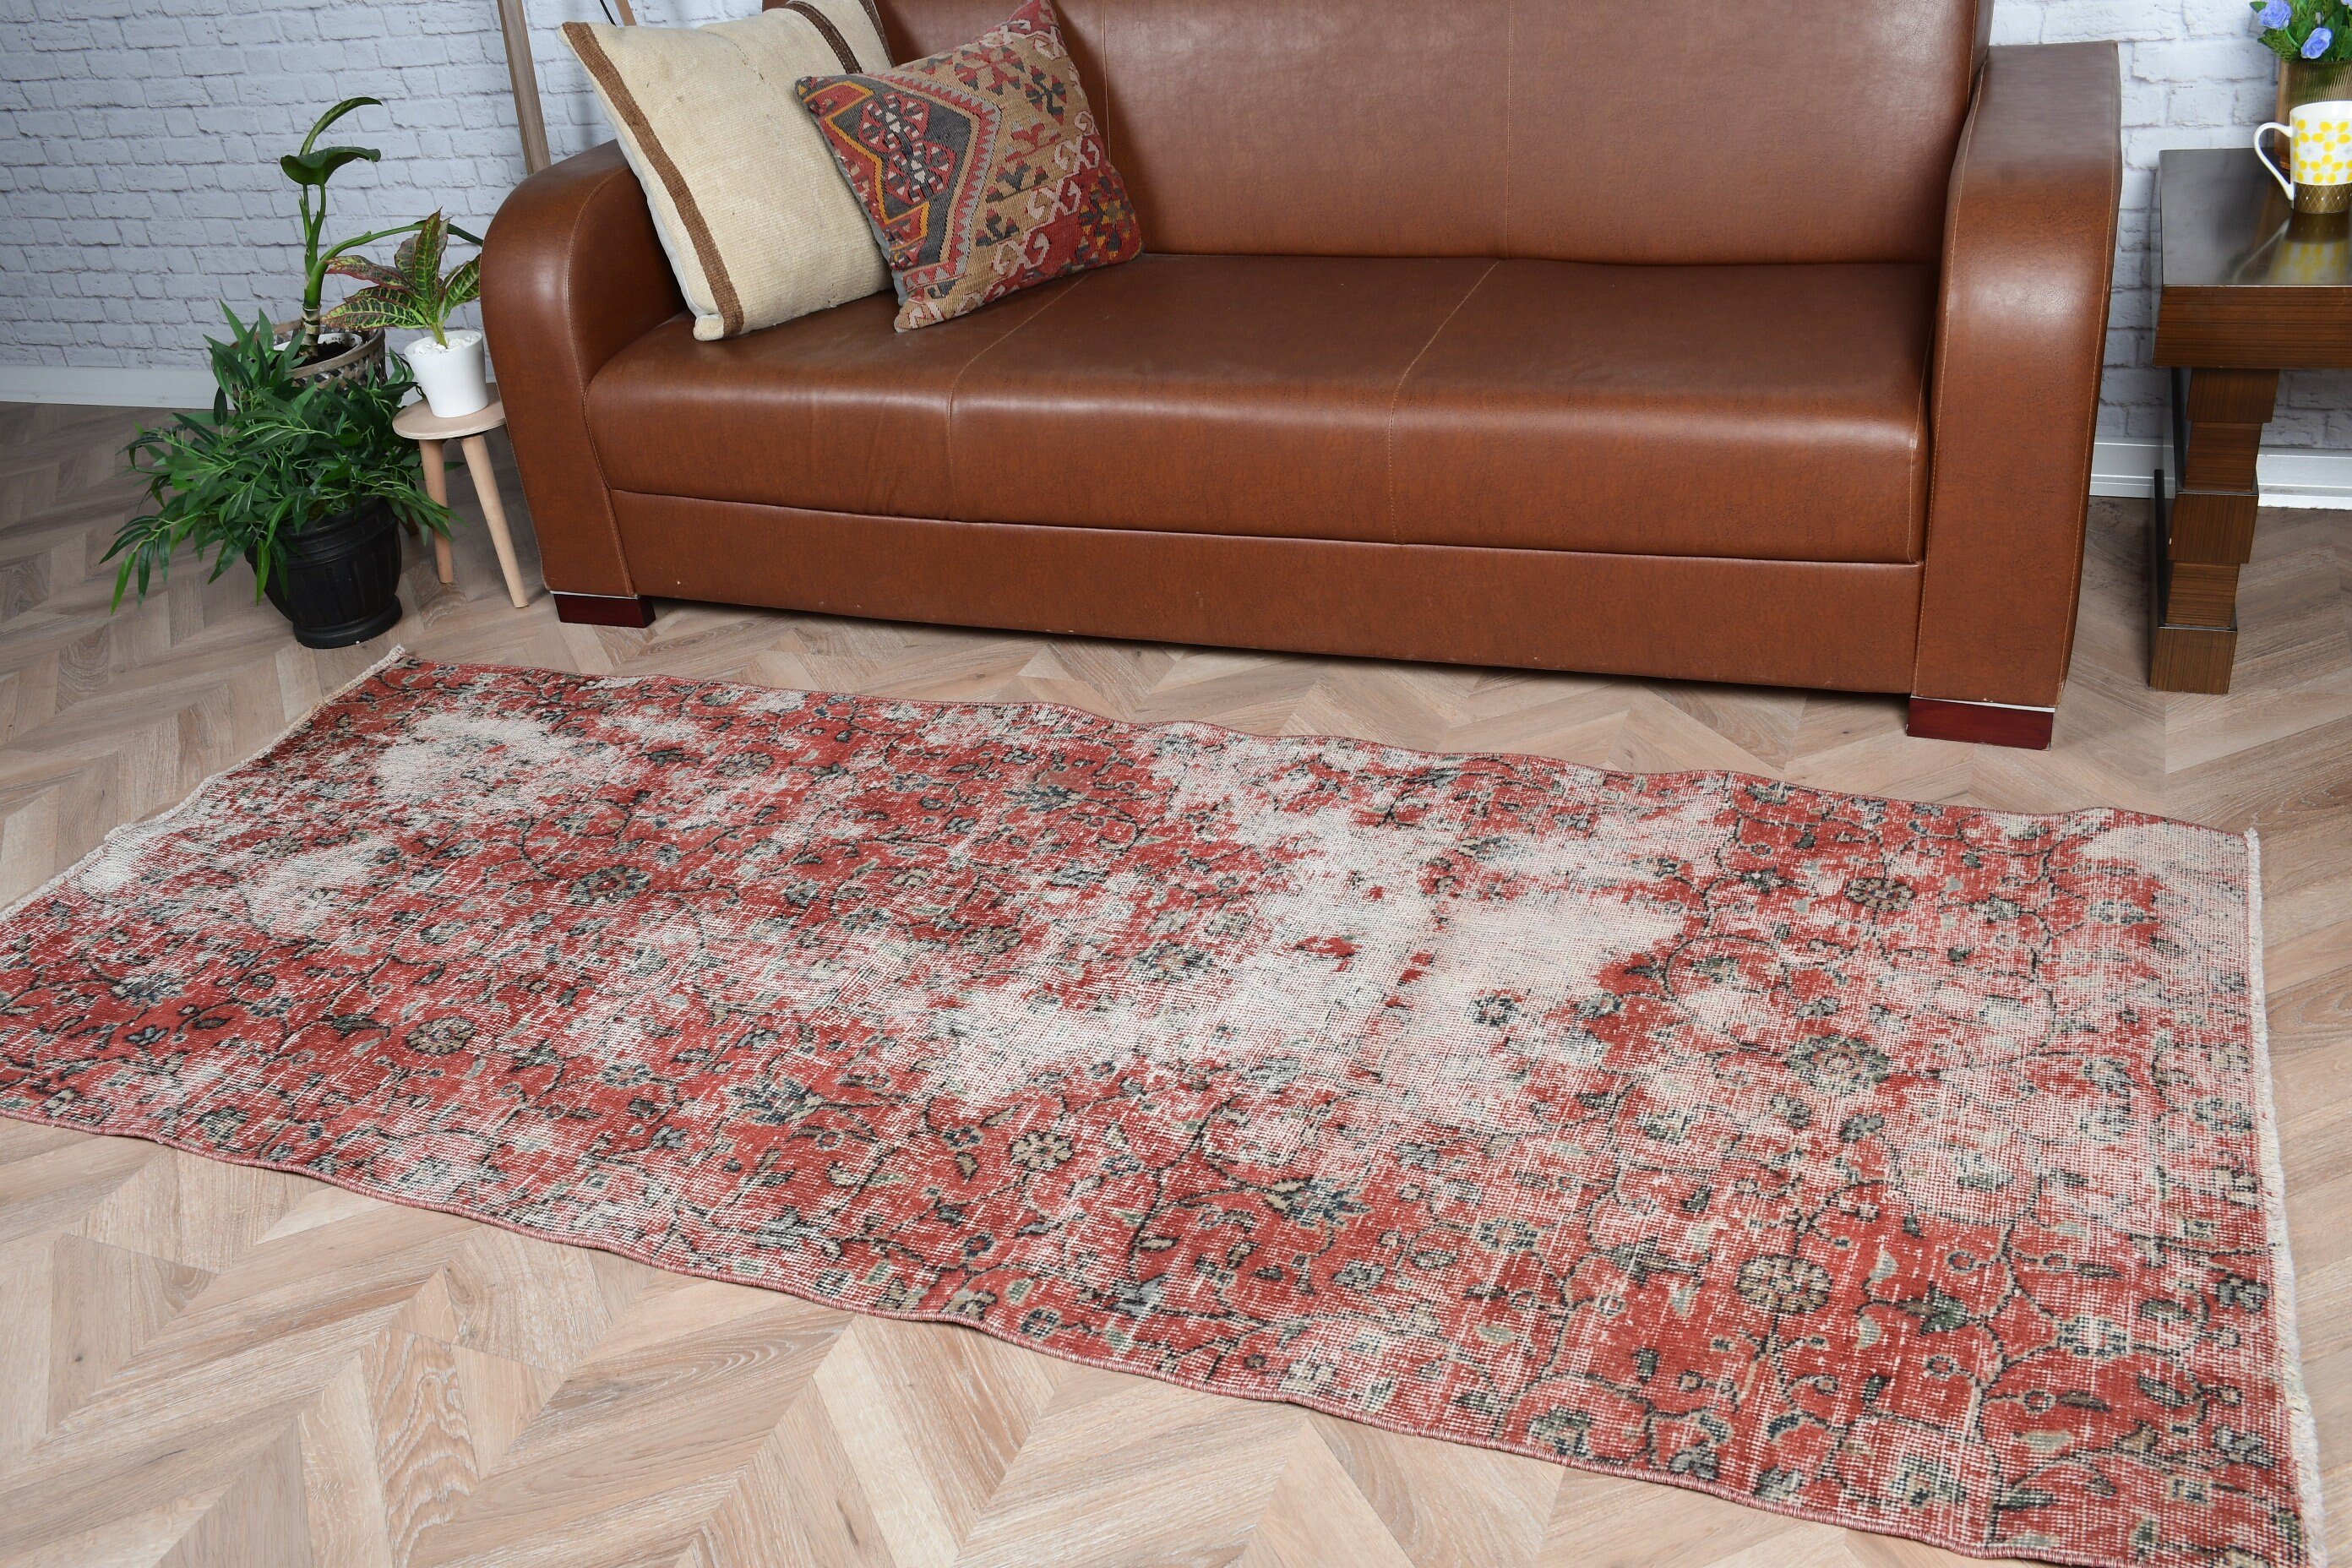 Rugs for Kitchen, Indoor Rug, 3.2x7.7 ft Area Rug, Vintage Rugs, Bedroom Rugs, Turkish Rugs, Kitchen Rugs, Red Cool Rug